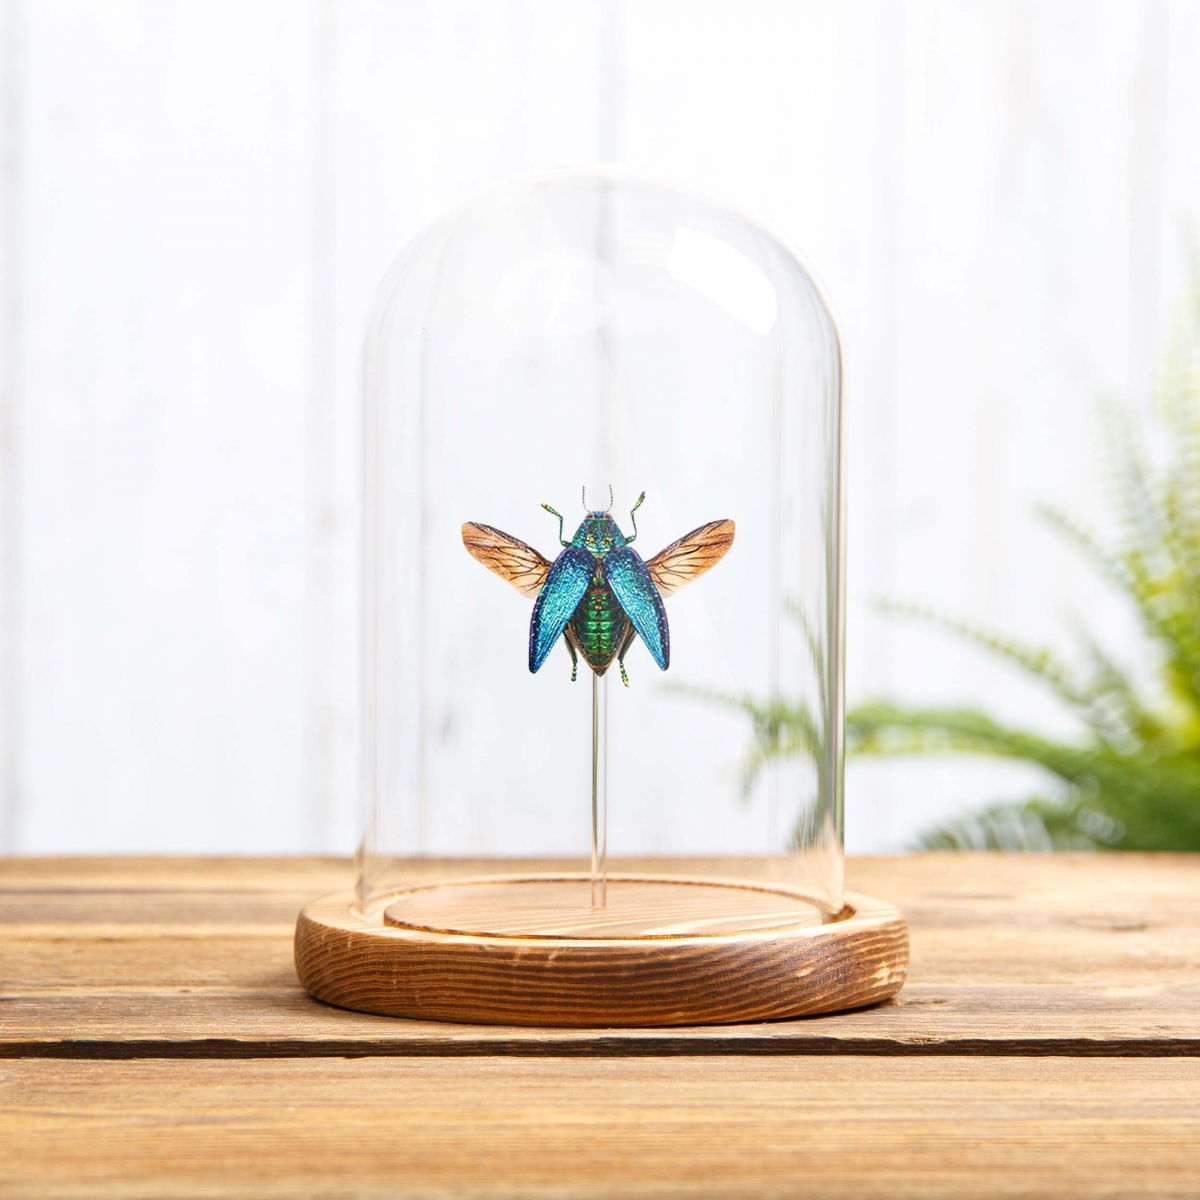 Malagasy Jewel Beetle in Glass Dome with Wooden Base (Polybothris sumptuosa)